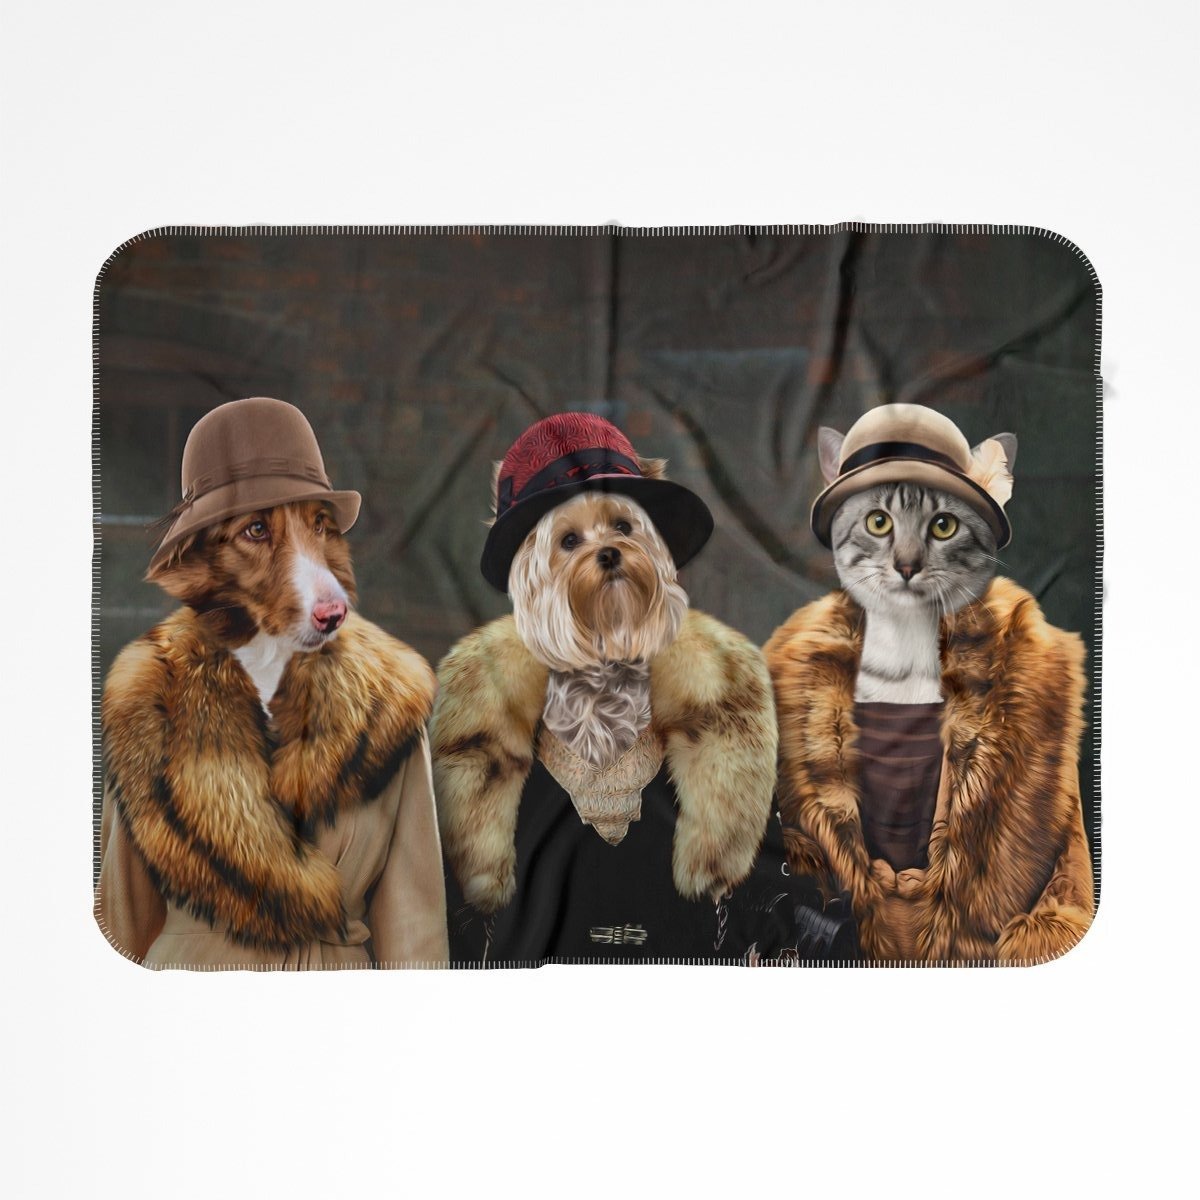 The Women (Peaky Blinders Inspired) 3 Pet: Custom Pet Blanket - Paw & Glory - #pet portraits# - #dog portraits# - #pet portraits uk#Pawandglory, Pet art blanket,cat picture blanket, blanket of dog's face, pet photo blanket throw, personalized dog photo blankets, pet collage blanket, personalized sherpa dog blanket